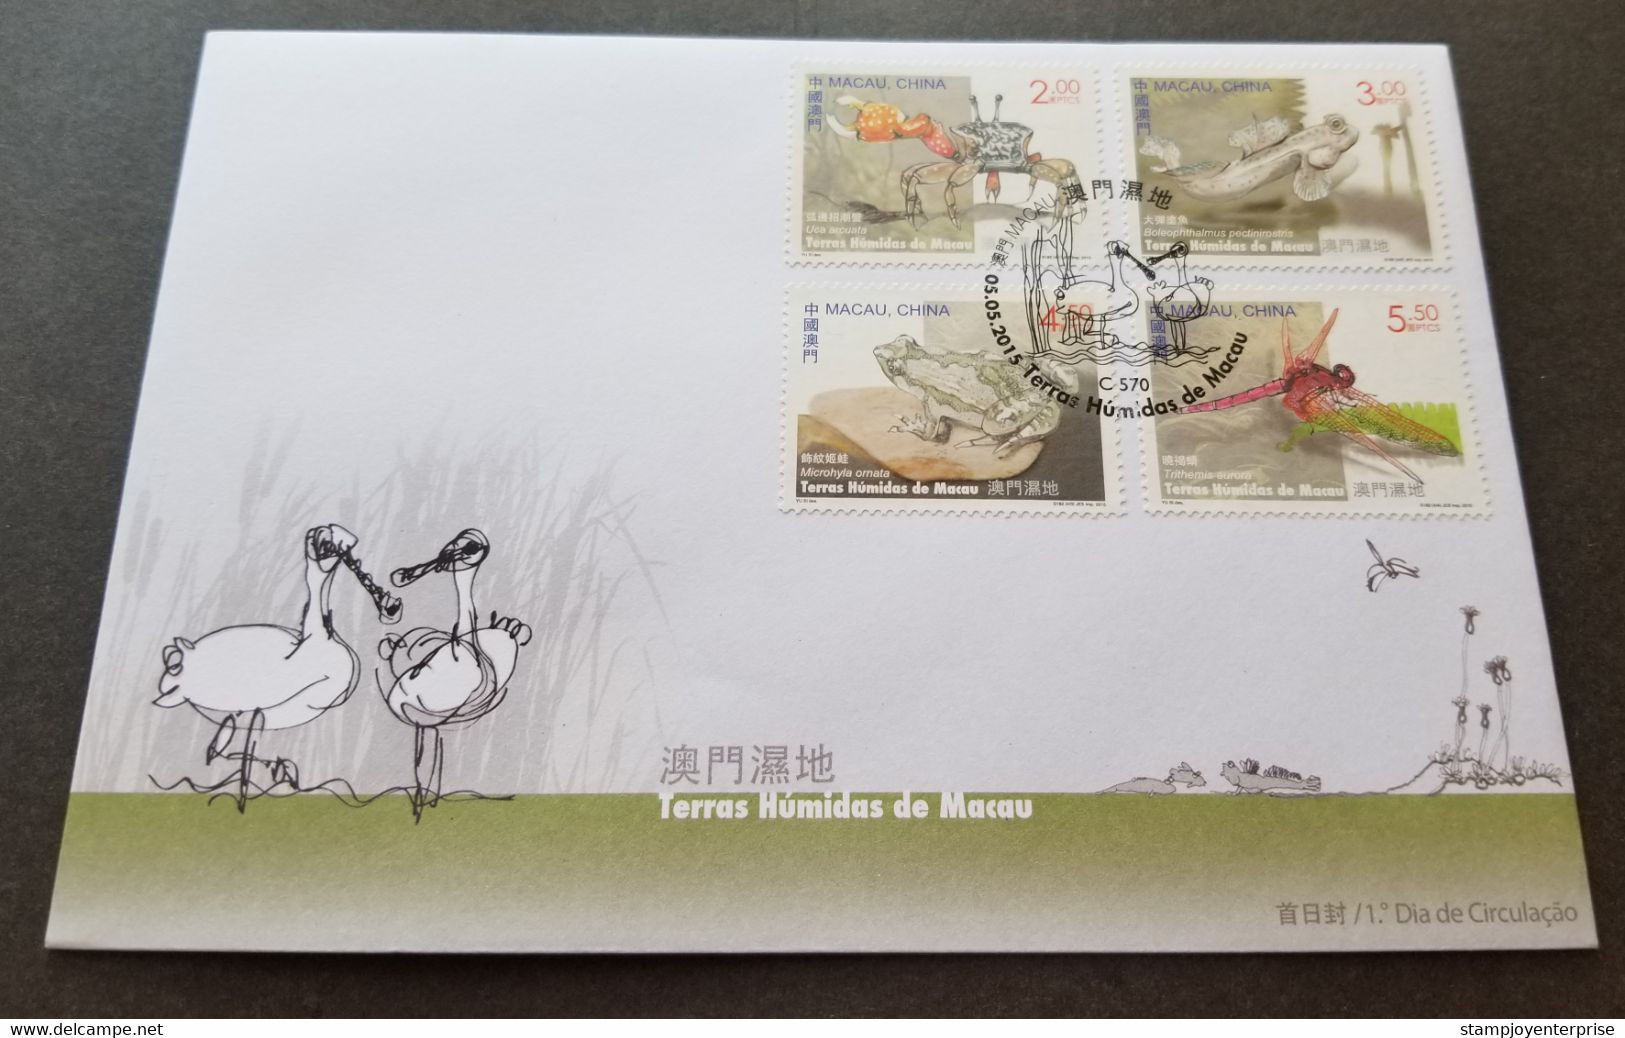 Macau Macao Wetland 2015 Dragonfly Insect Frog Crab Bird Fauna (stamp FDC) - Covers & Documents